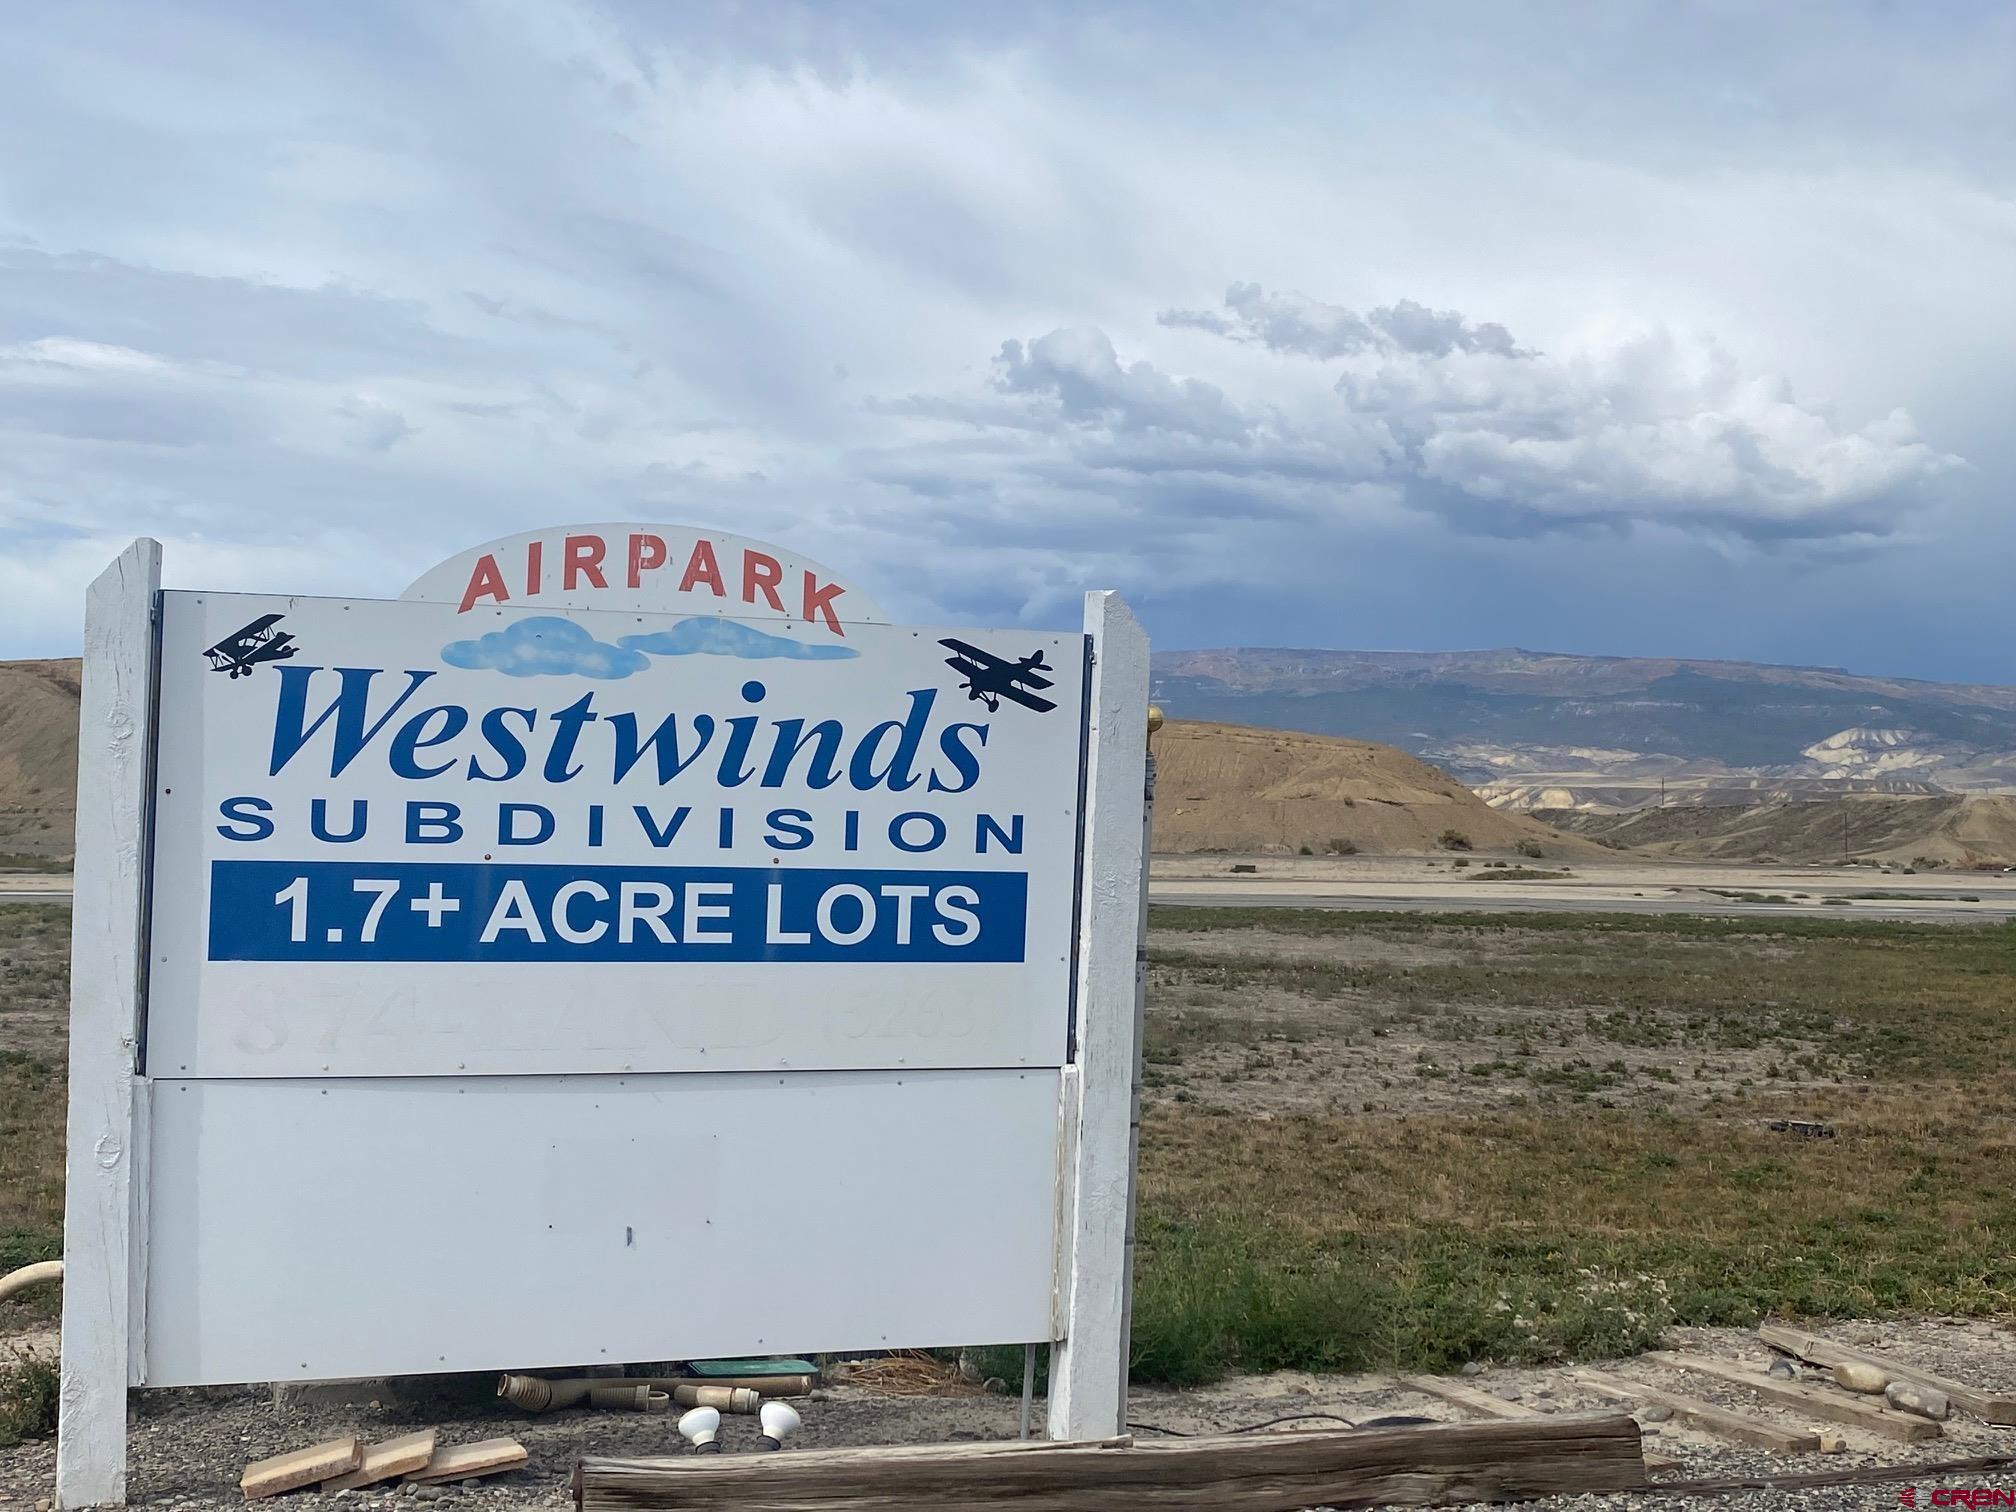 Great opportunity to own a lot on the Westwind's airport right of the main runway.